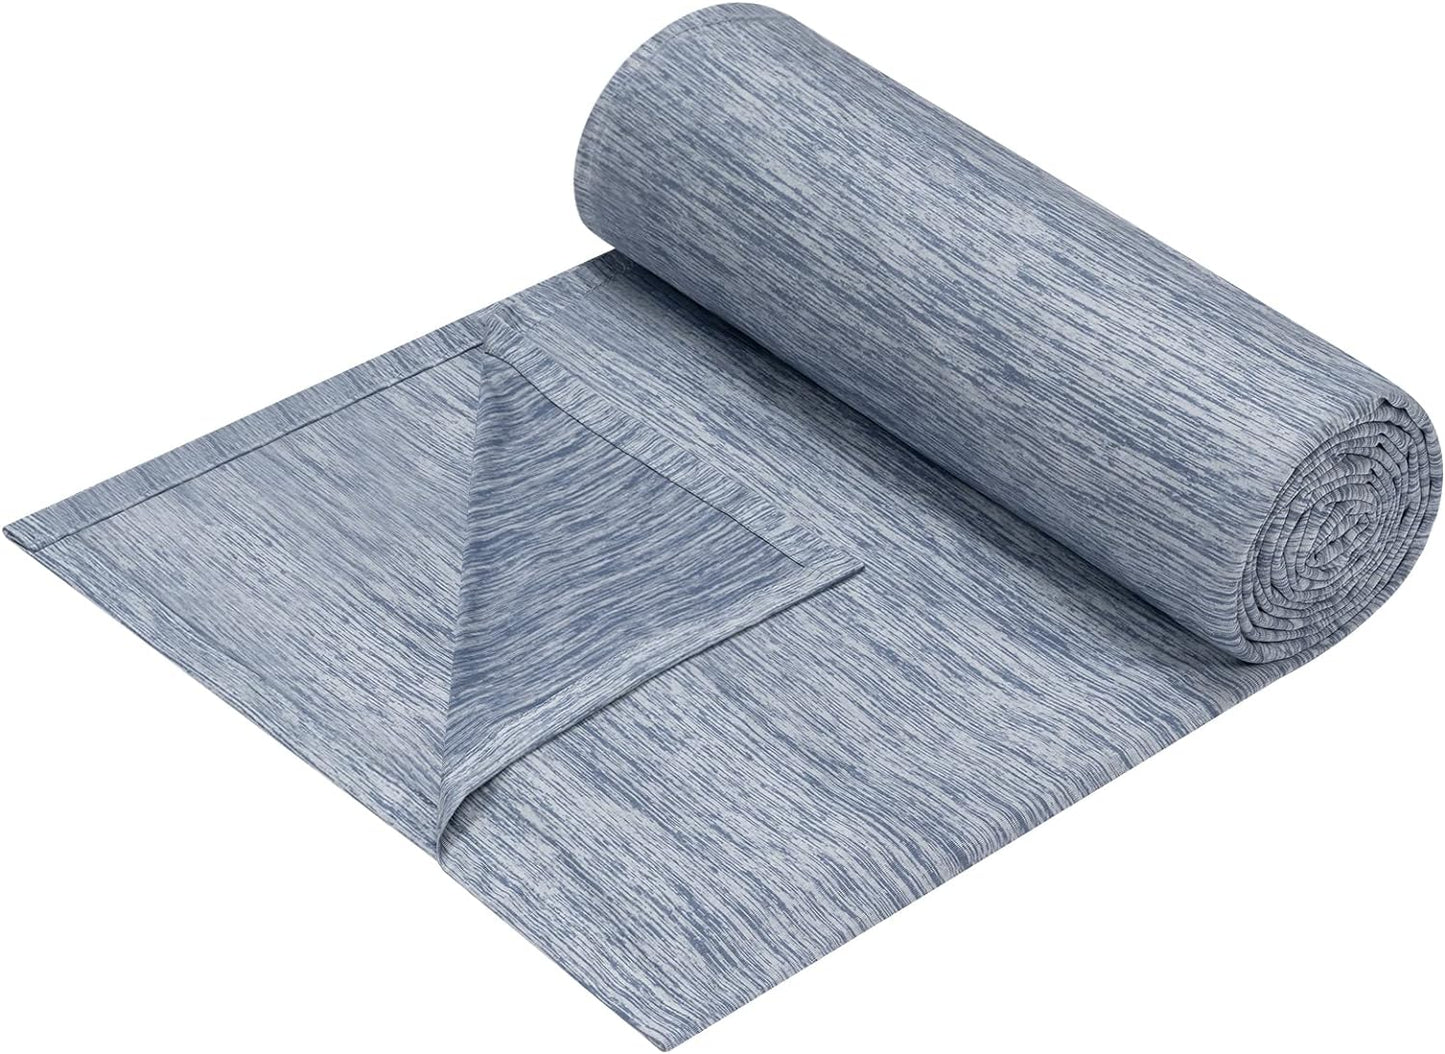 Summer Blanket Self-Cooling Blanket Microfiber Arc-Chill, Cooling Blanket with Q-Max>0.45, Cool and Skin-Friendly, Soft Sofa Blanket Travel Blanket 220 x 200cm/150 x 200cm Blue